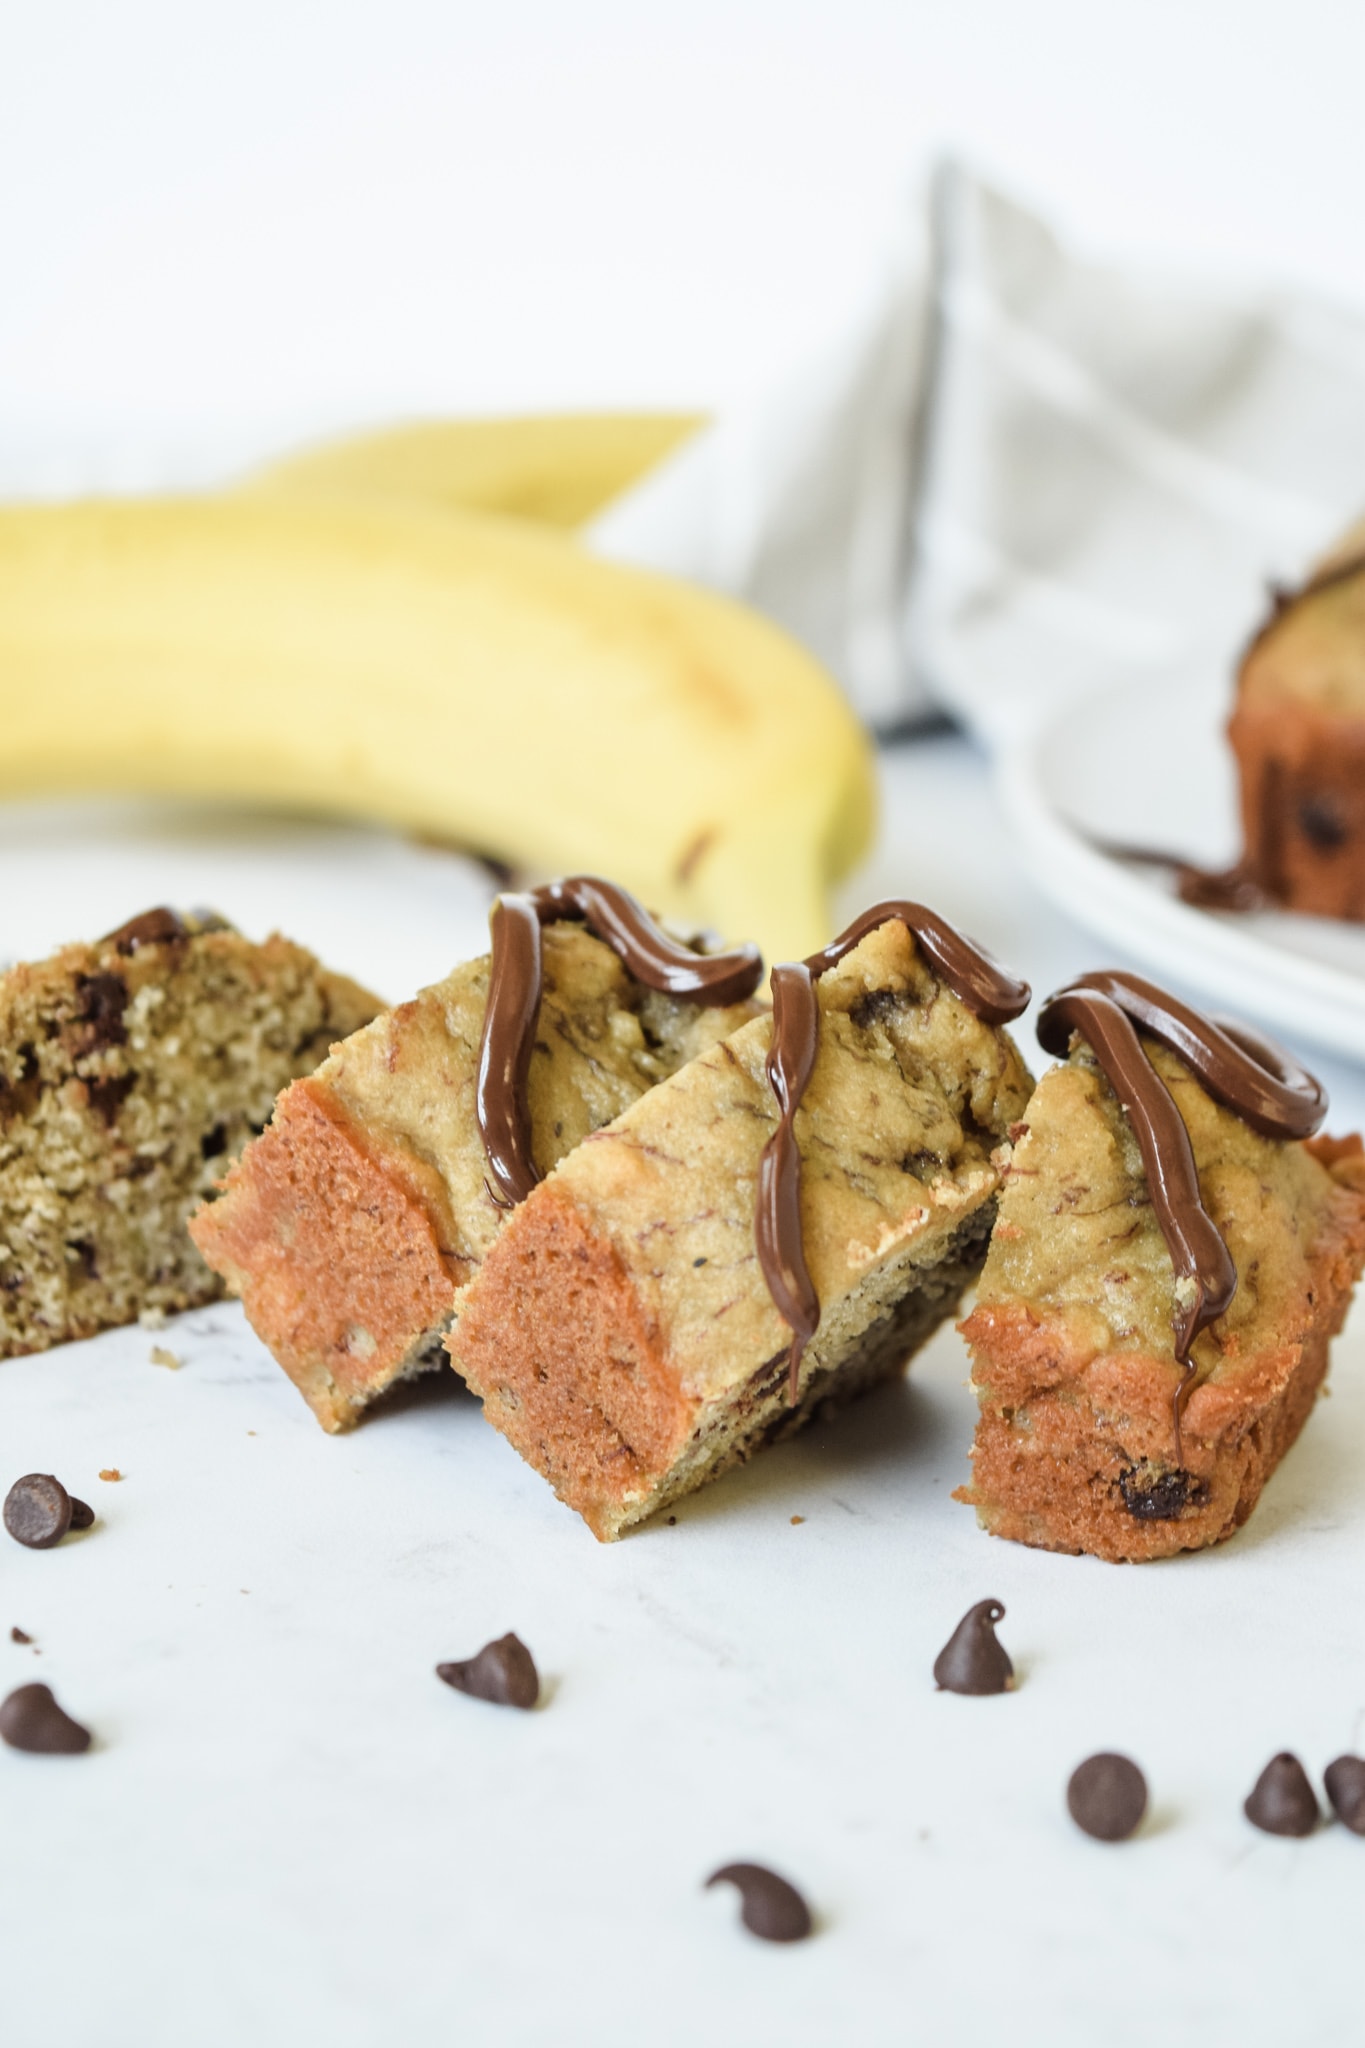 Slices of Gluten Free Banana Bread with Chocolate Chips